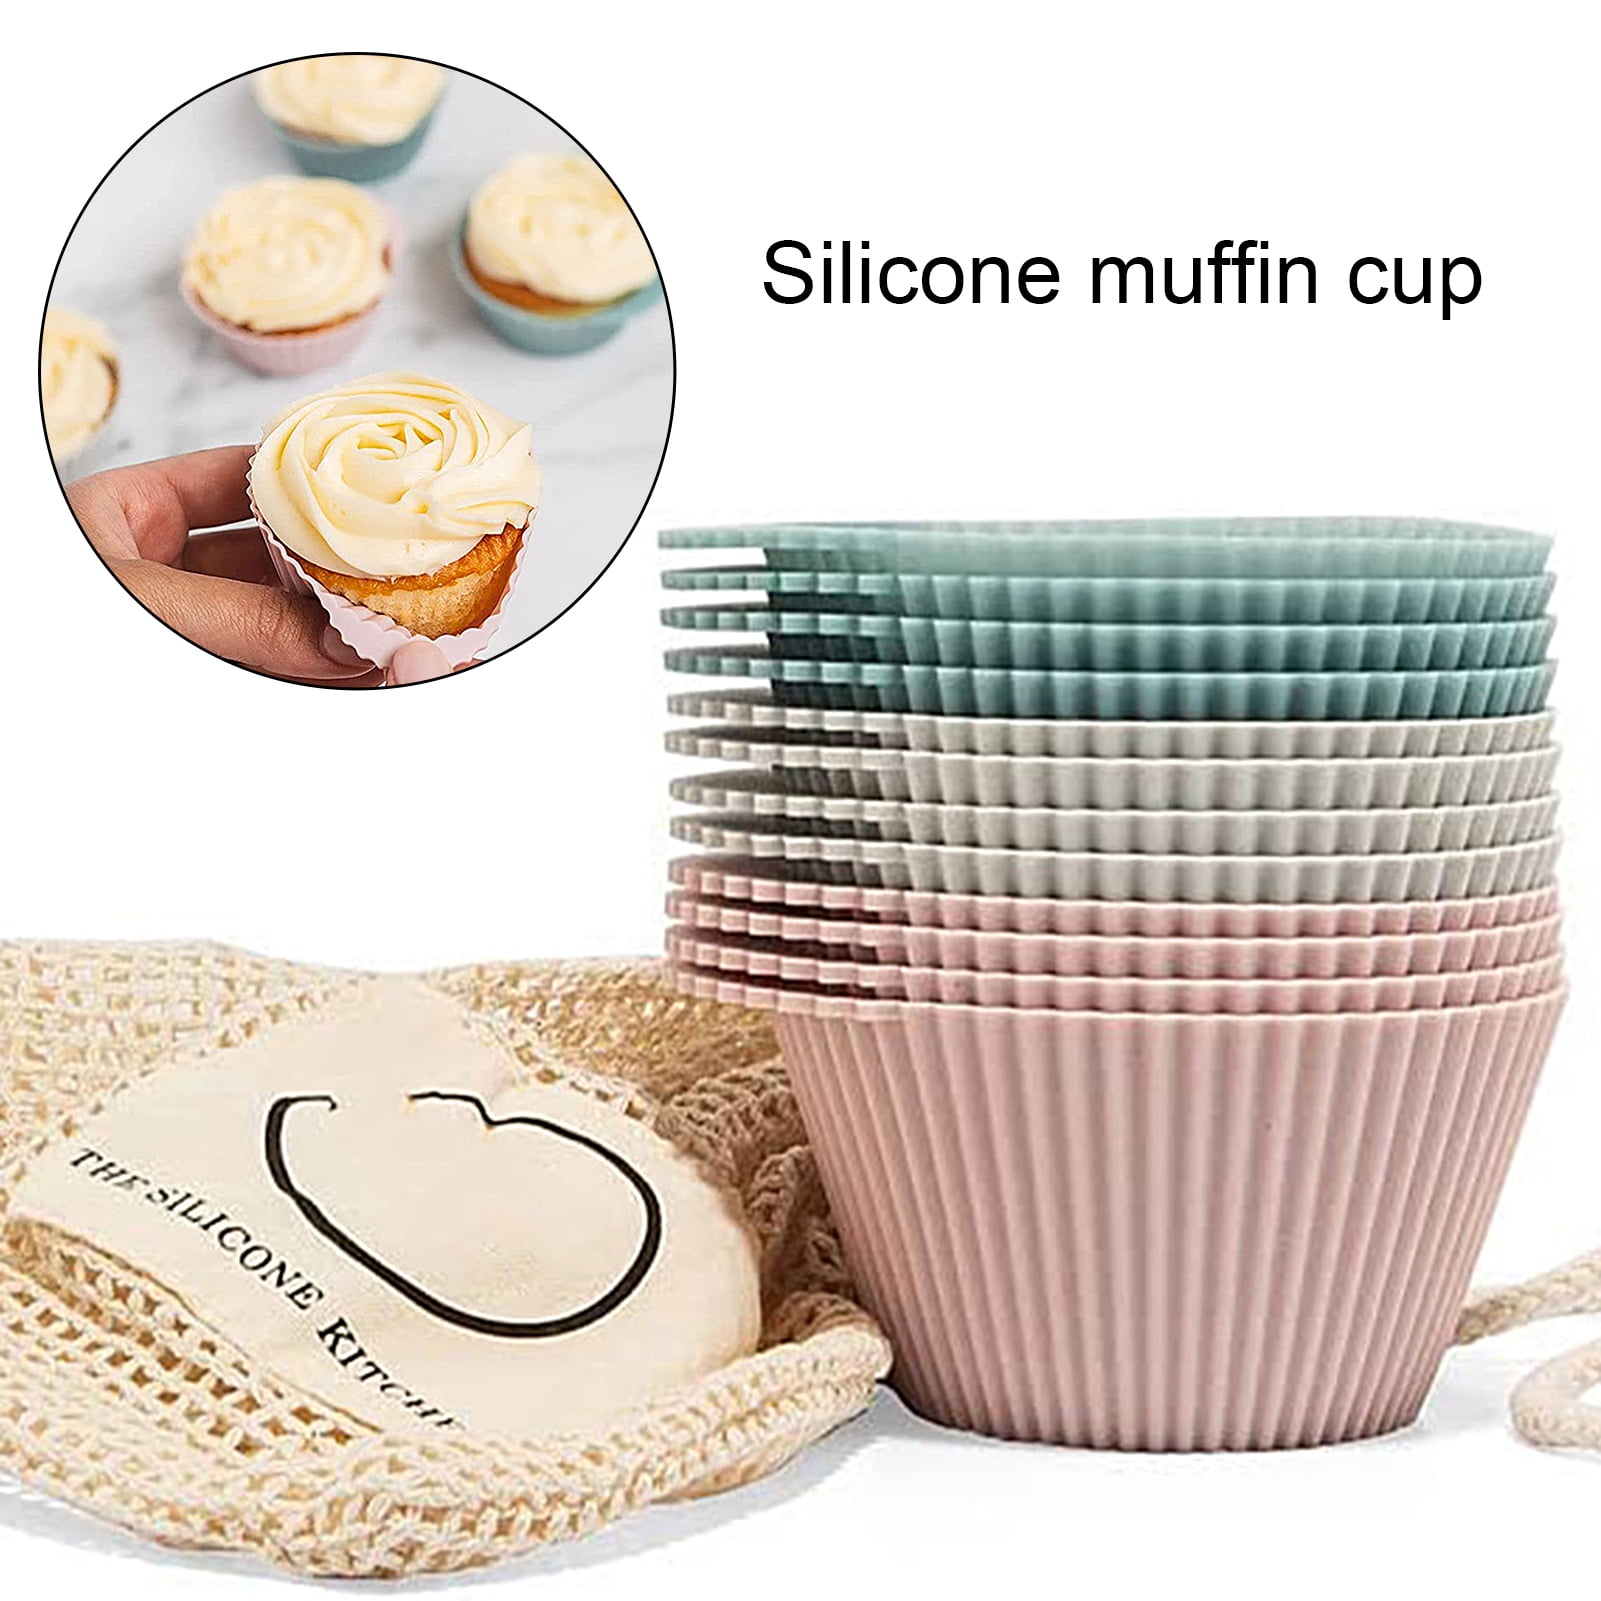 Reusable Silicone Muffin Cups 12Pcs, Non-Sticky, Food Grade Cupcake Making  Cup Mold, DIY Baking Accessories, Kitchen Silicone Muffin Liner Baking Cups,  Bakery Supplies 